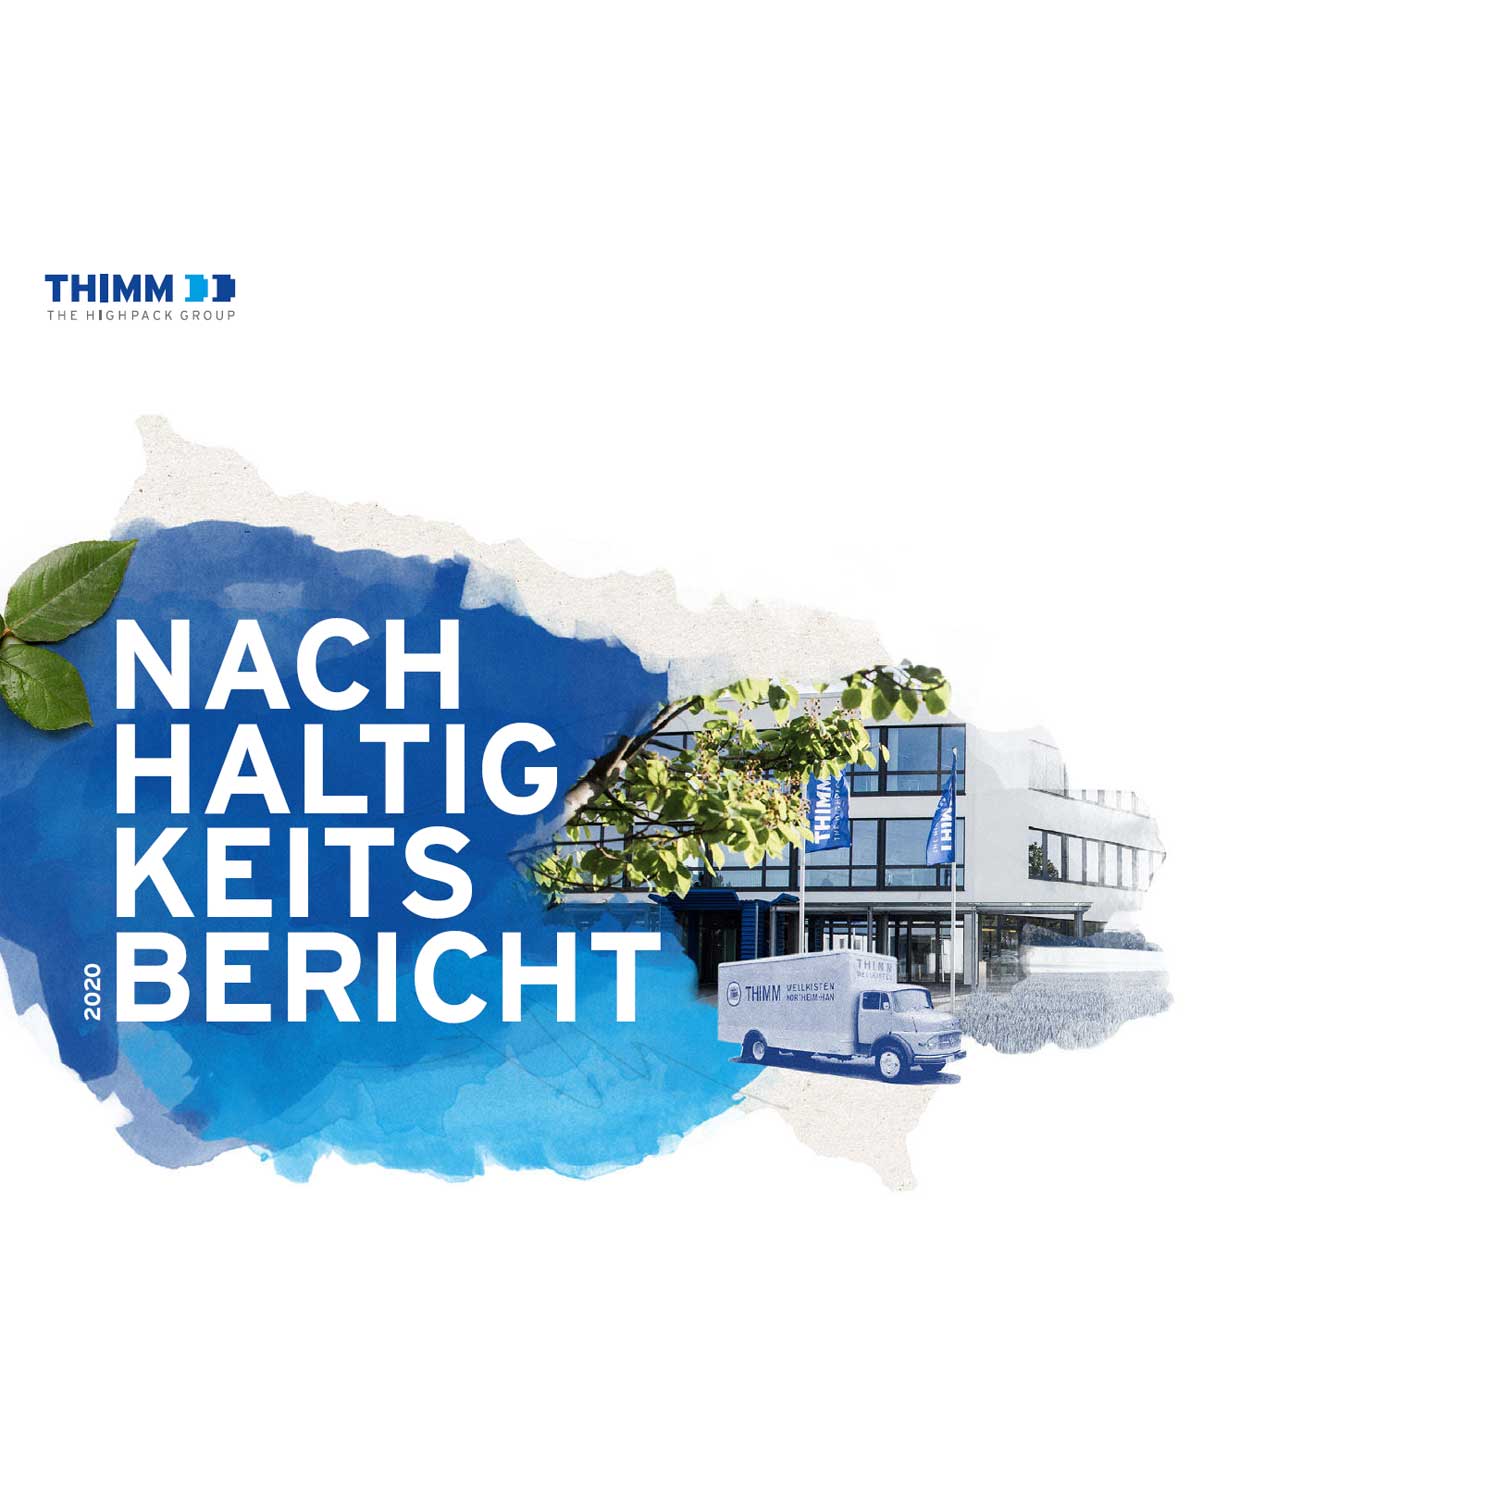 THIMM Sustainability Report 2020